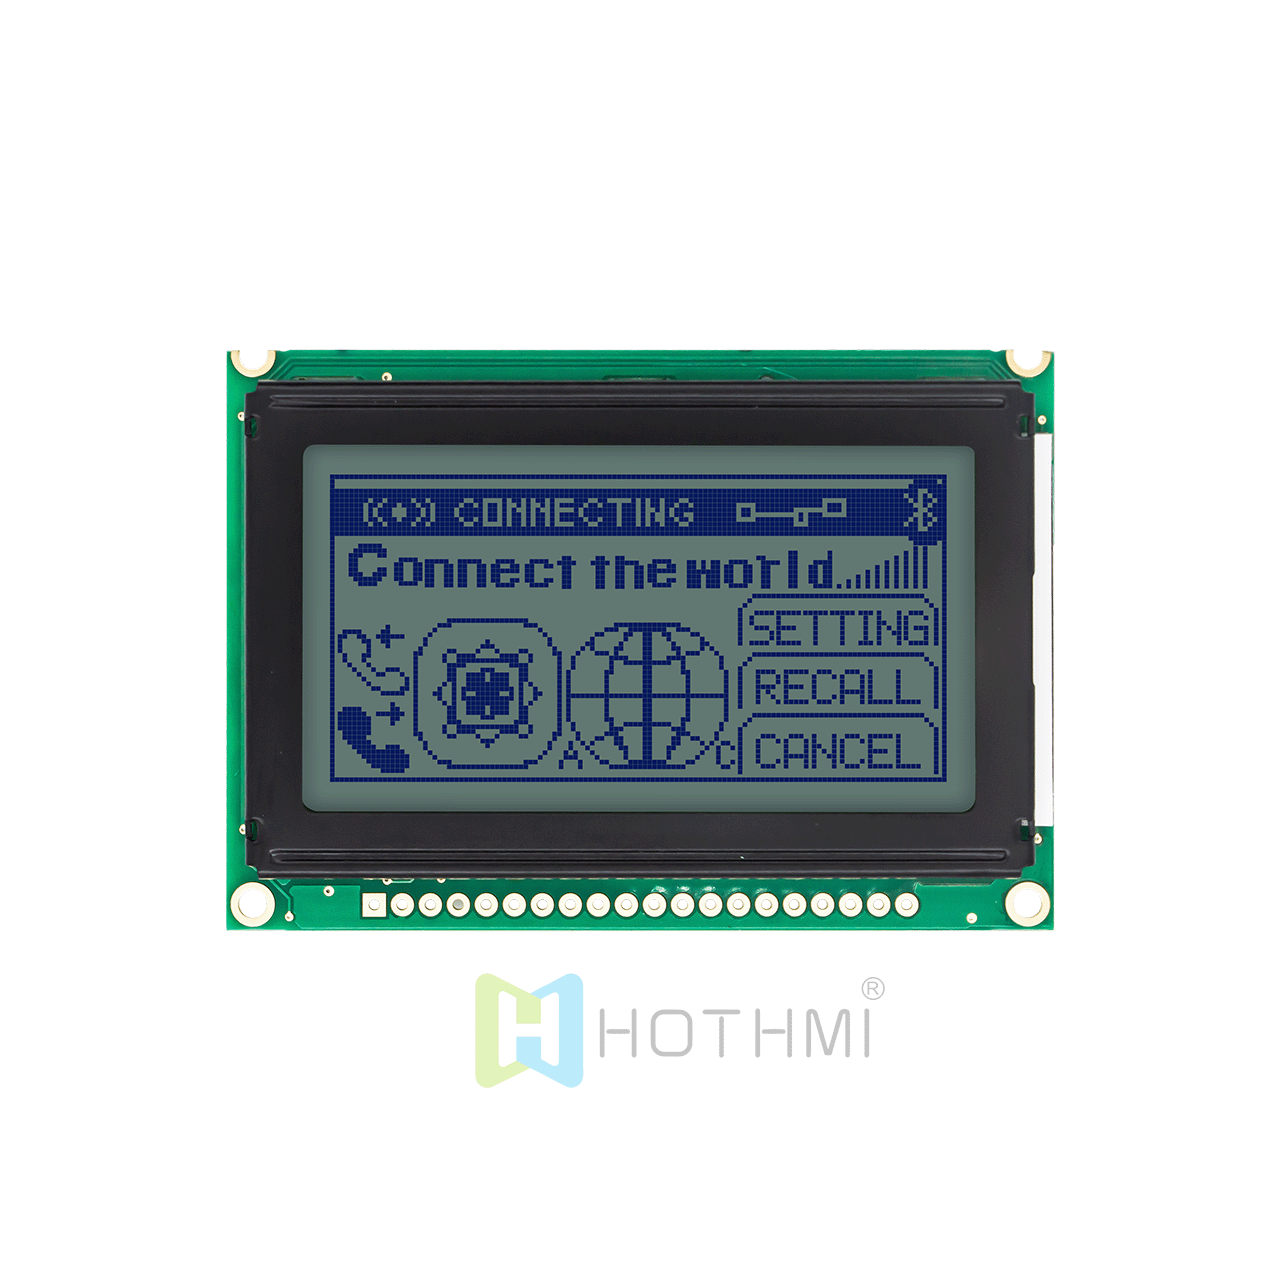 2.7 inch 128x64 LCD Graphic Liquid Crystal Dot Matrix Module | 12864 Graphic LCD Display Module | STN Positive Display | Adruino | Gray Background Blue Text